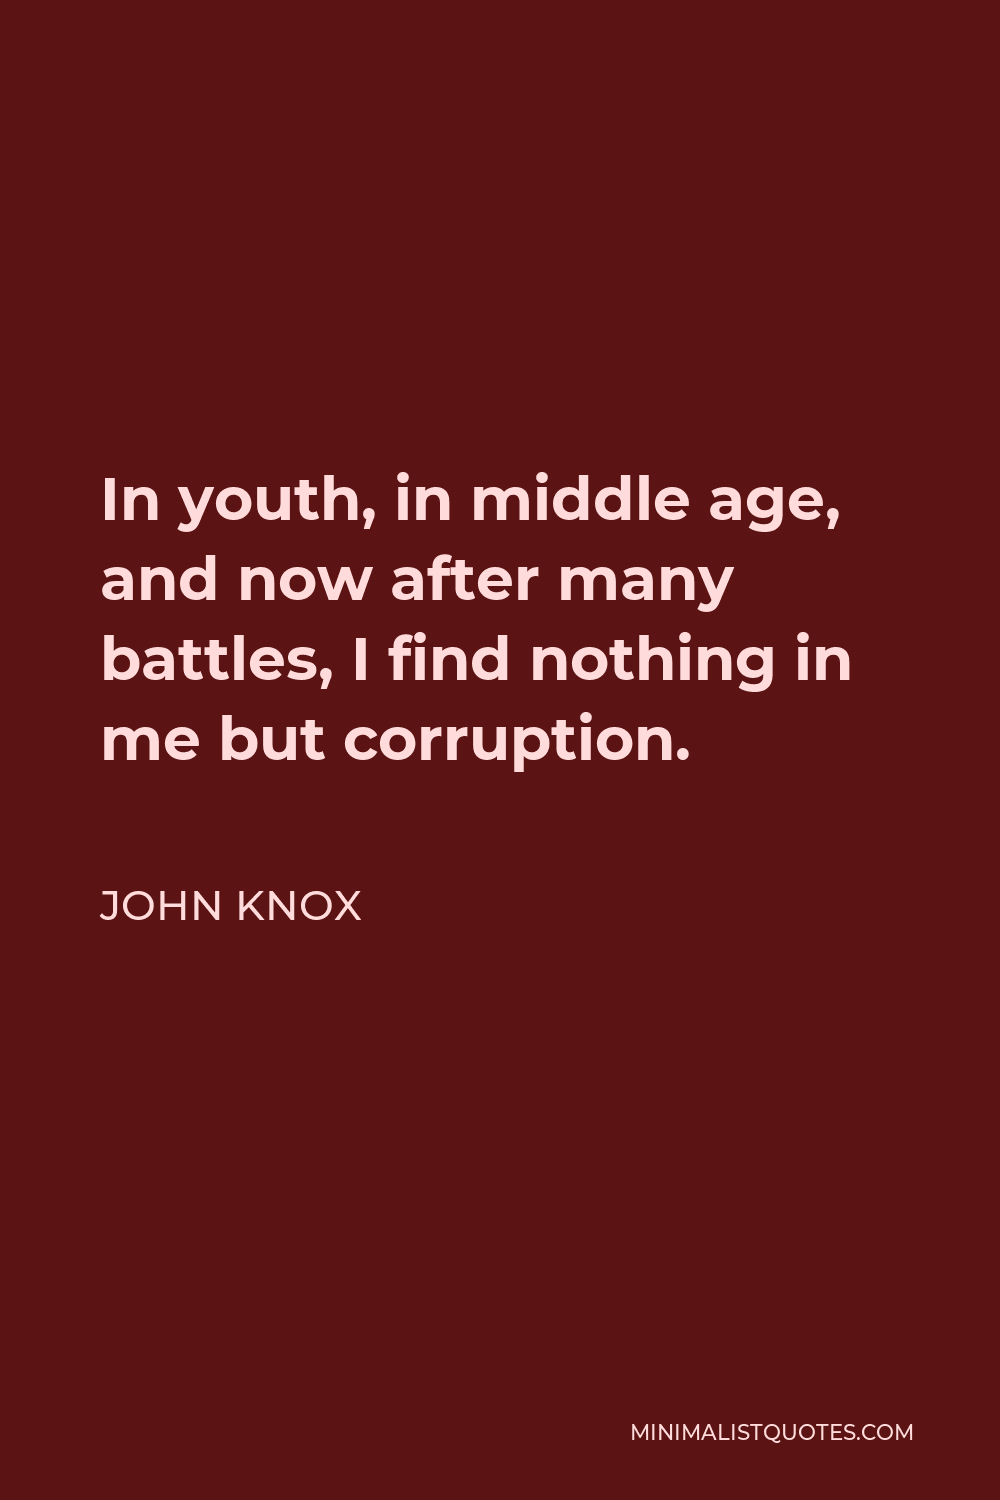 John Knox Quote - In youth, in middle age, and now after many battles, I find nothing in me but corruption.